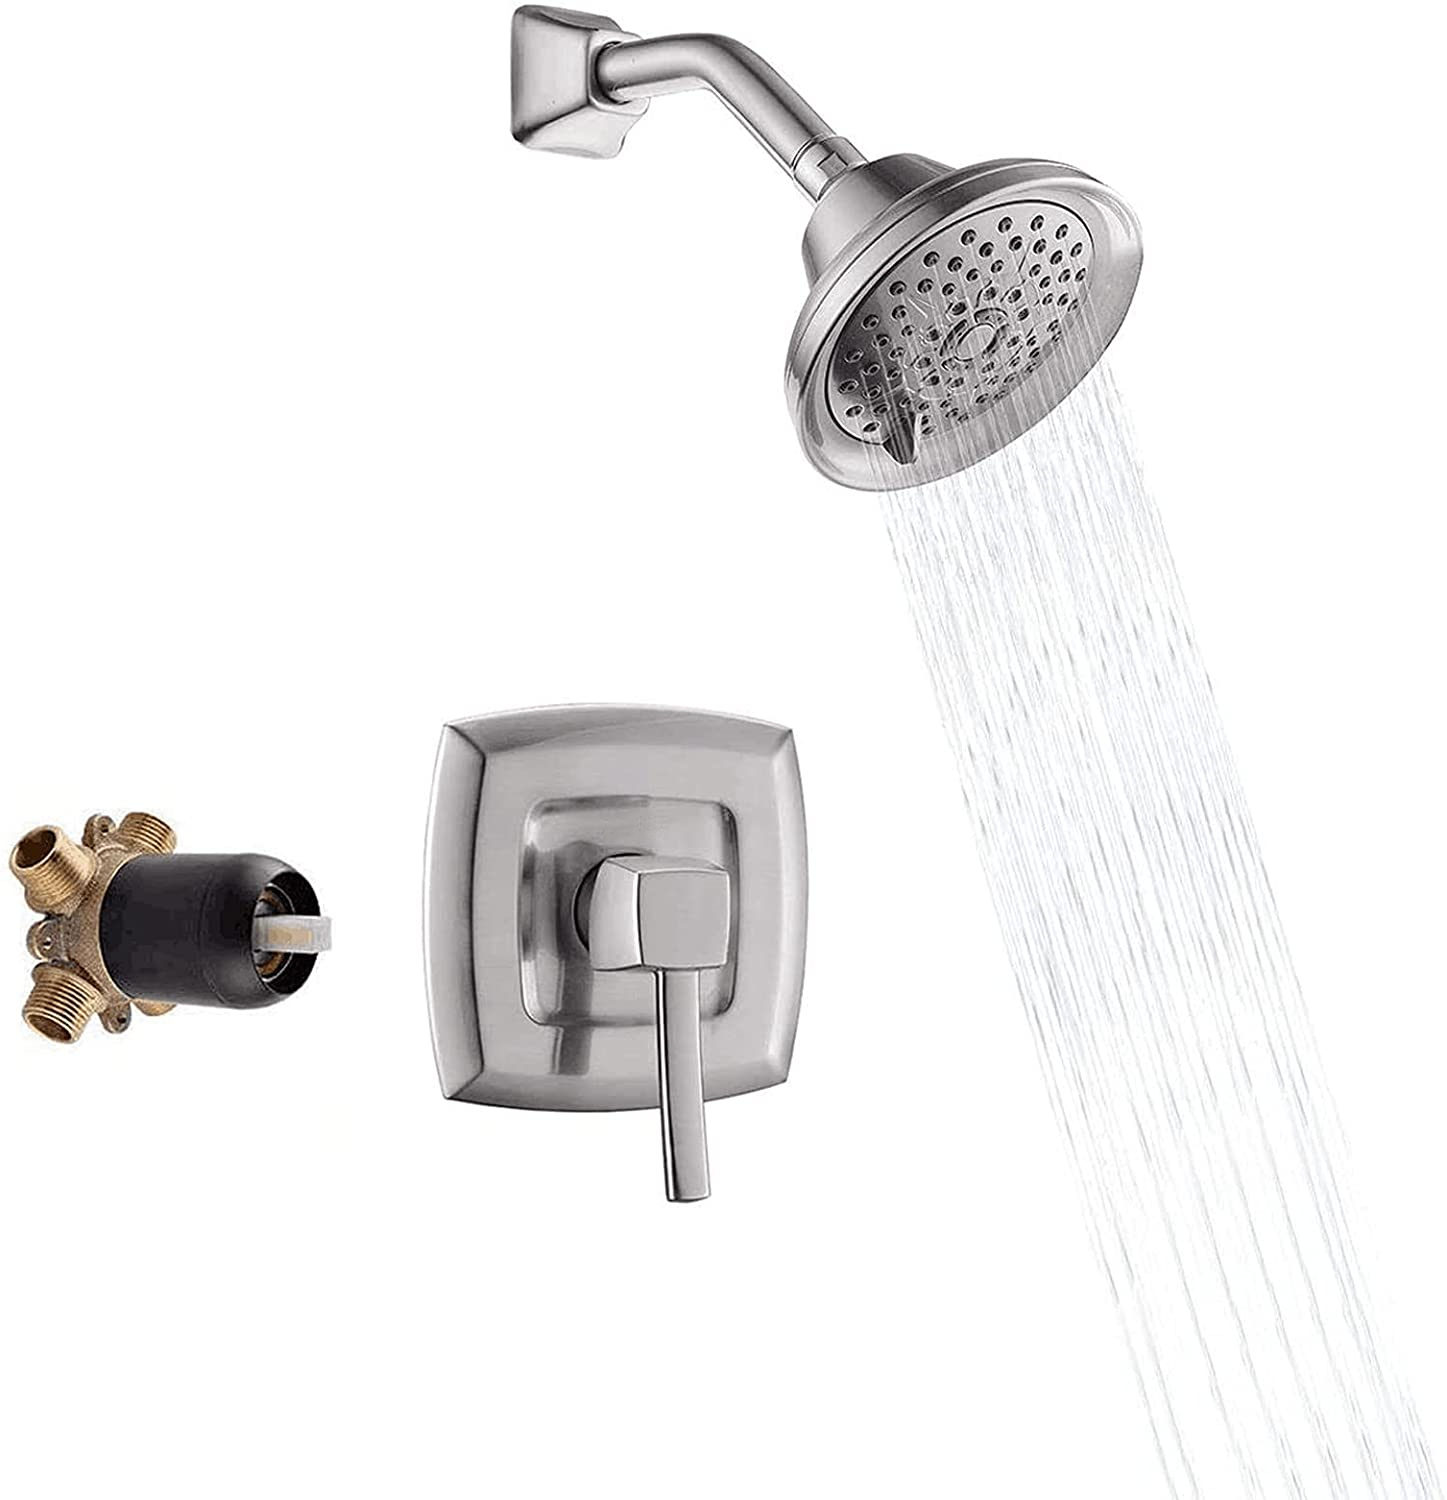 Classic Style Concealed Faucet Shower Faucet Rain In Brushed Nickel For Bathroom